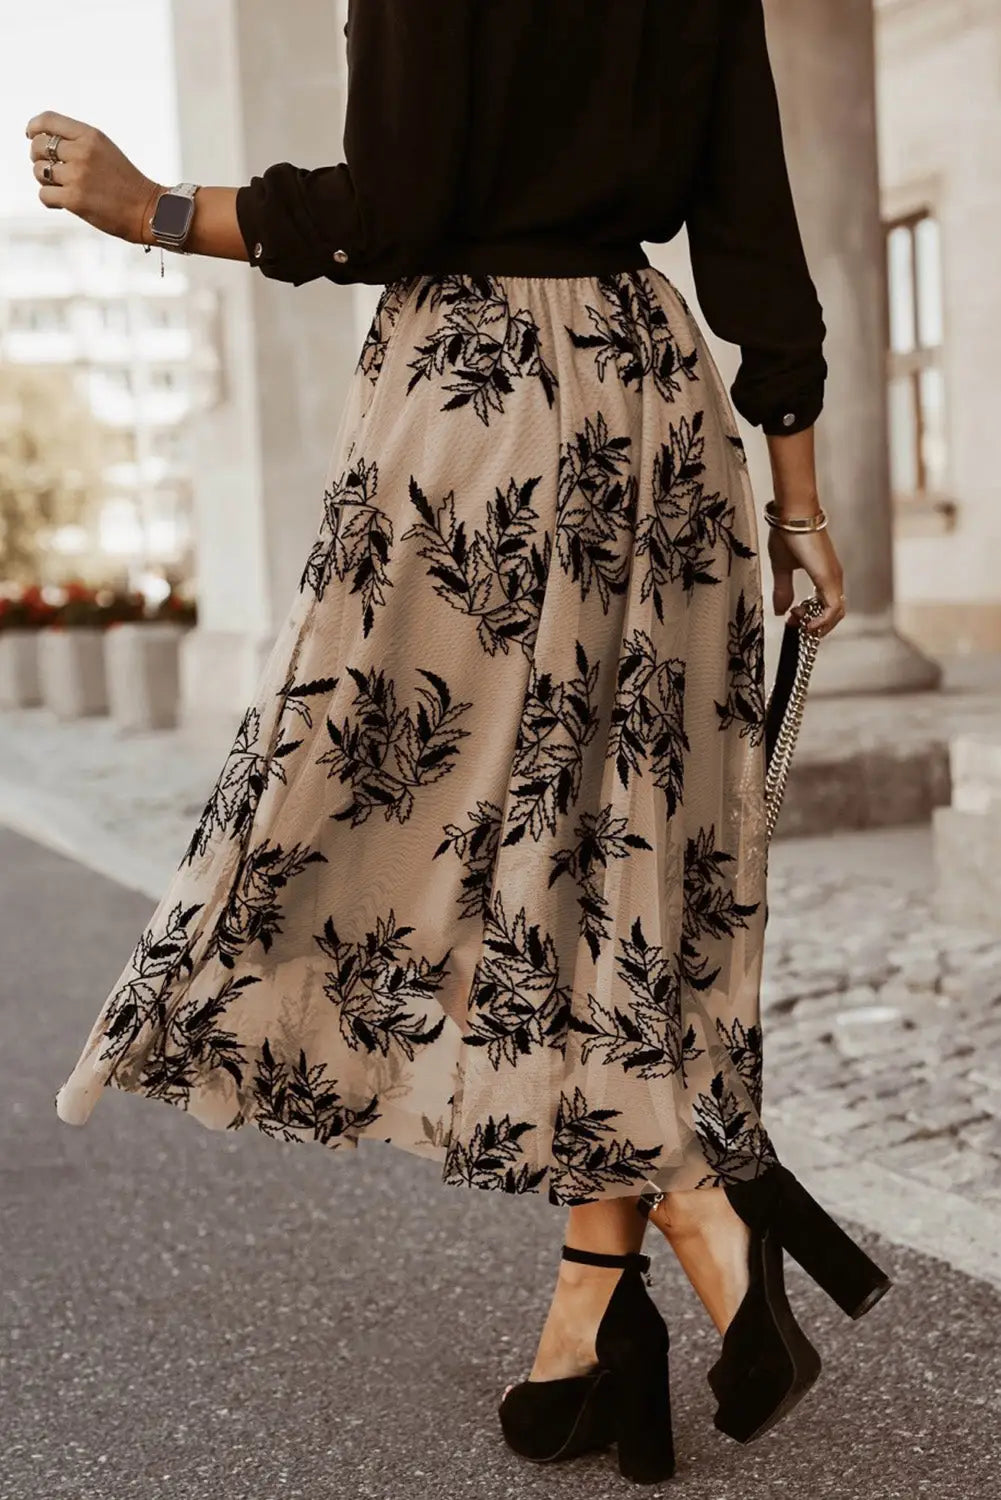 Apricot floral leaves embroidered high waist maxi skirt - skirts